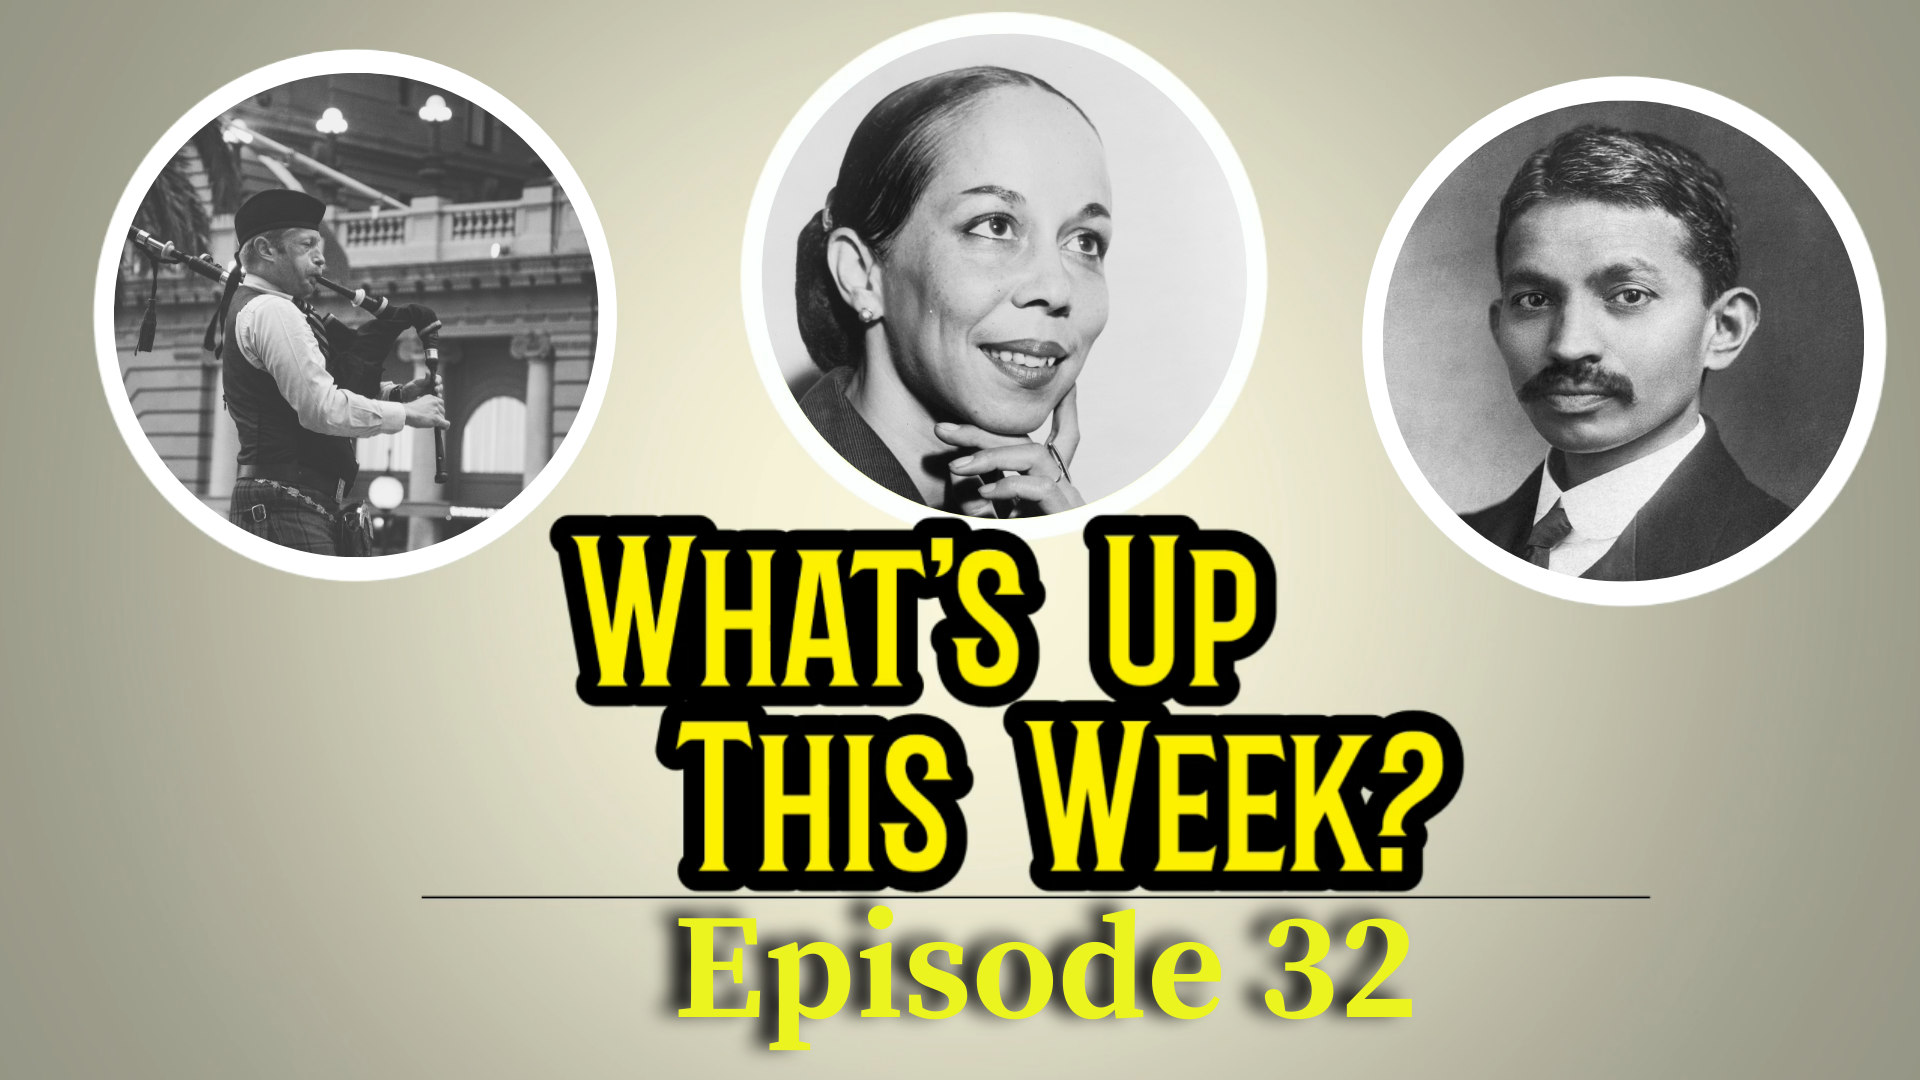 "What's Up This Week: Episode 32". 3 circles with images inside: bagpipers, Janet Collins, and Gandhi.